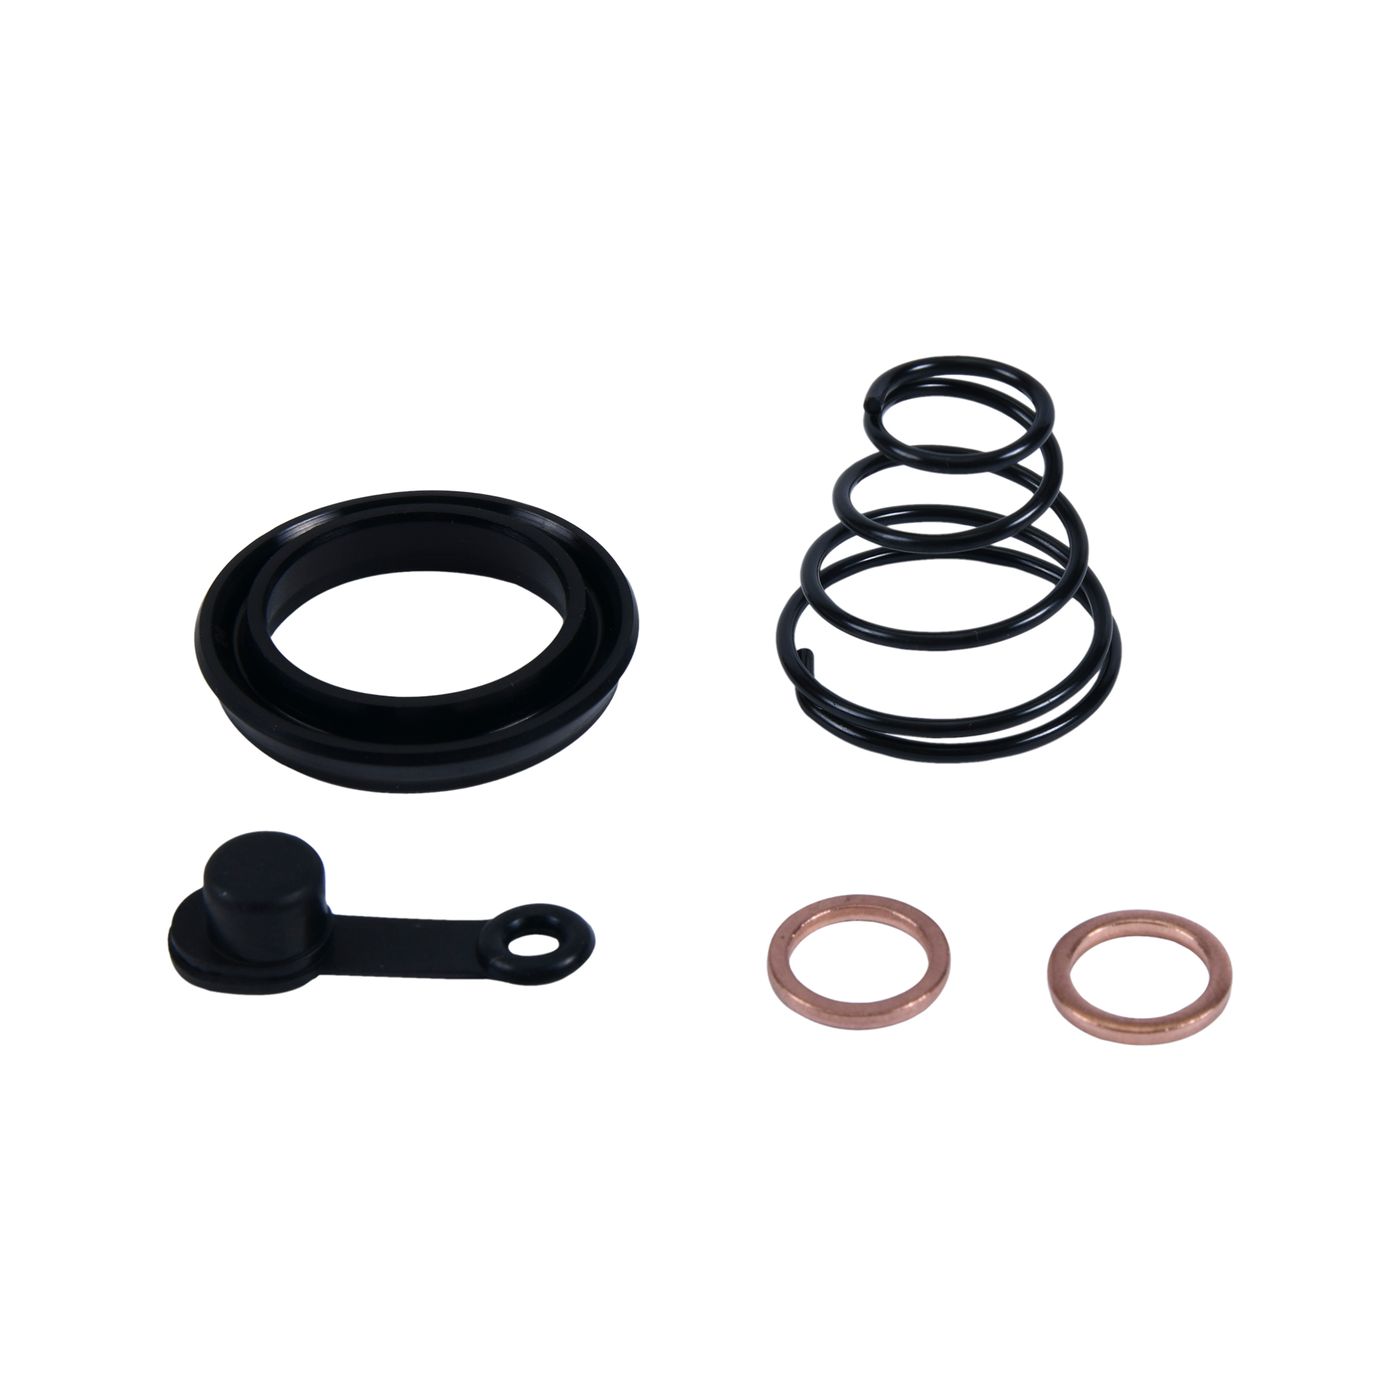 Wrp Clutch Slave Cylinder Kits - WRP186018 image